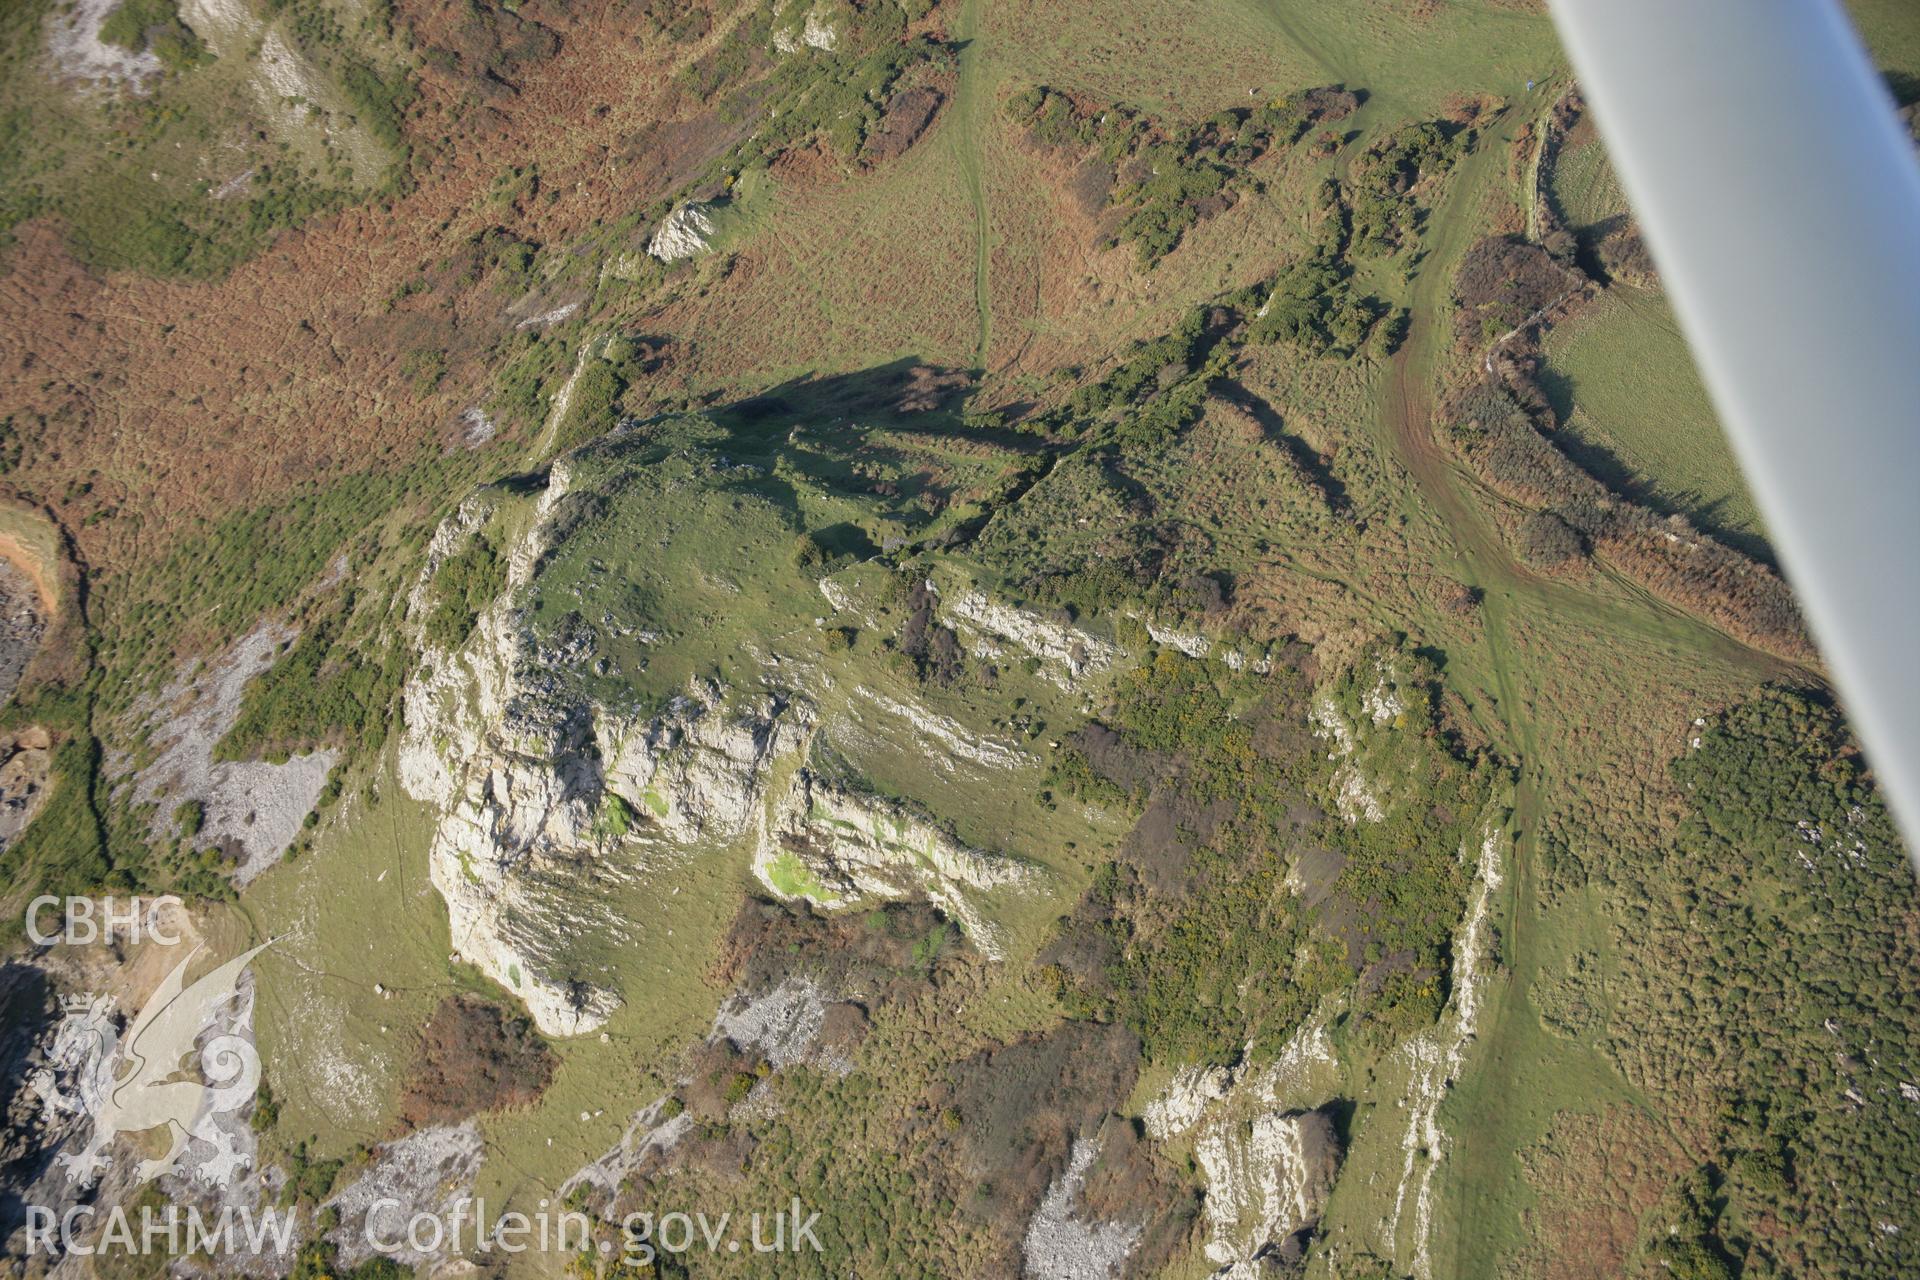 RCAHMW colour oblique aerial photograph of High Pennard Hillfort from the south-east Taken on 26 January 2006 by Toby Driver.